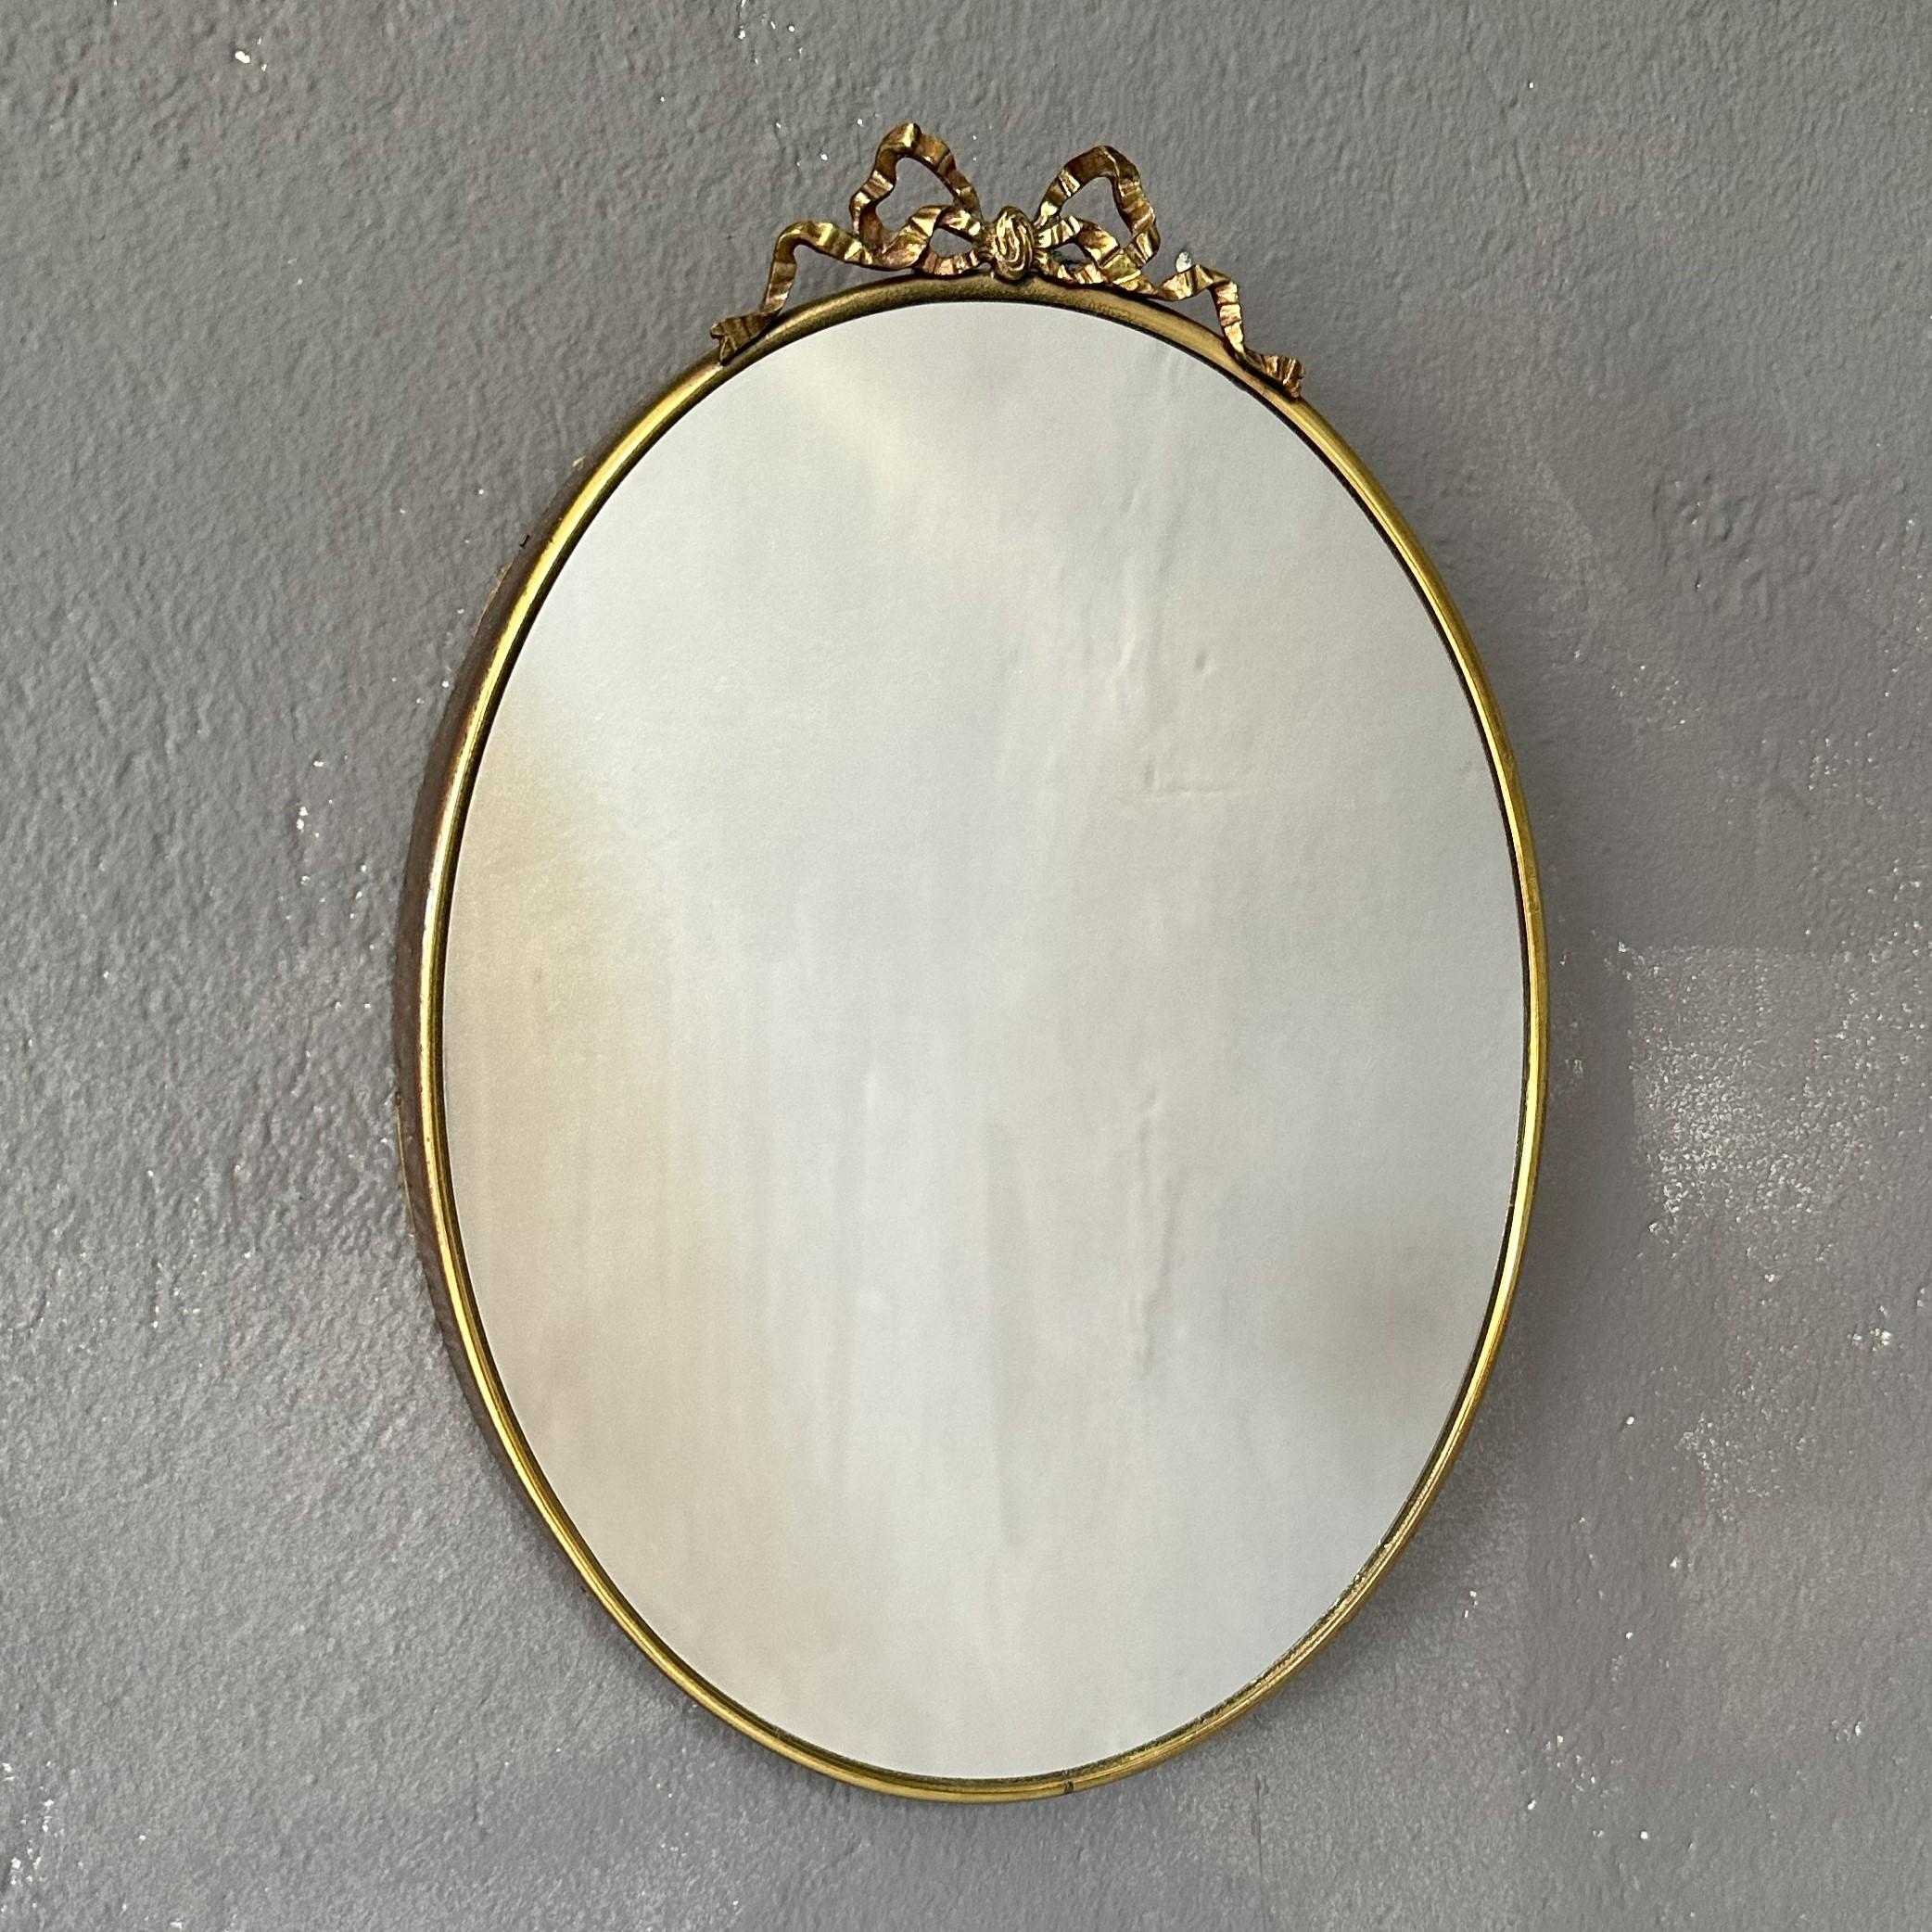 Oval mirror from the 1950s, Italian manufacture, with brass frame.
The mirror has a maximum width of 24cm and a height of 30cm.
On the top of the frame there is a brass decoration (with this decoration the height is 33 cm).
Very good condition, one